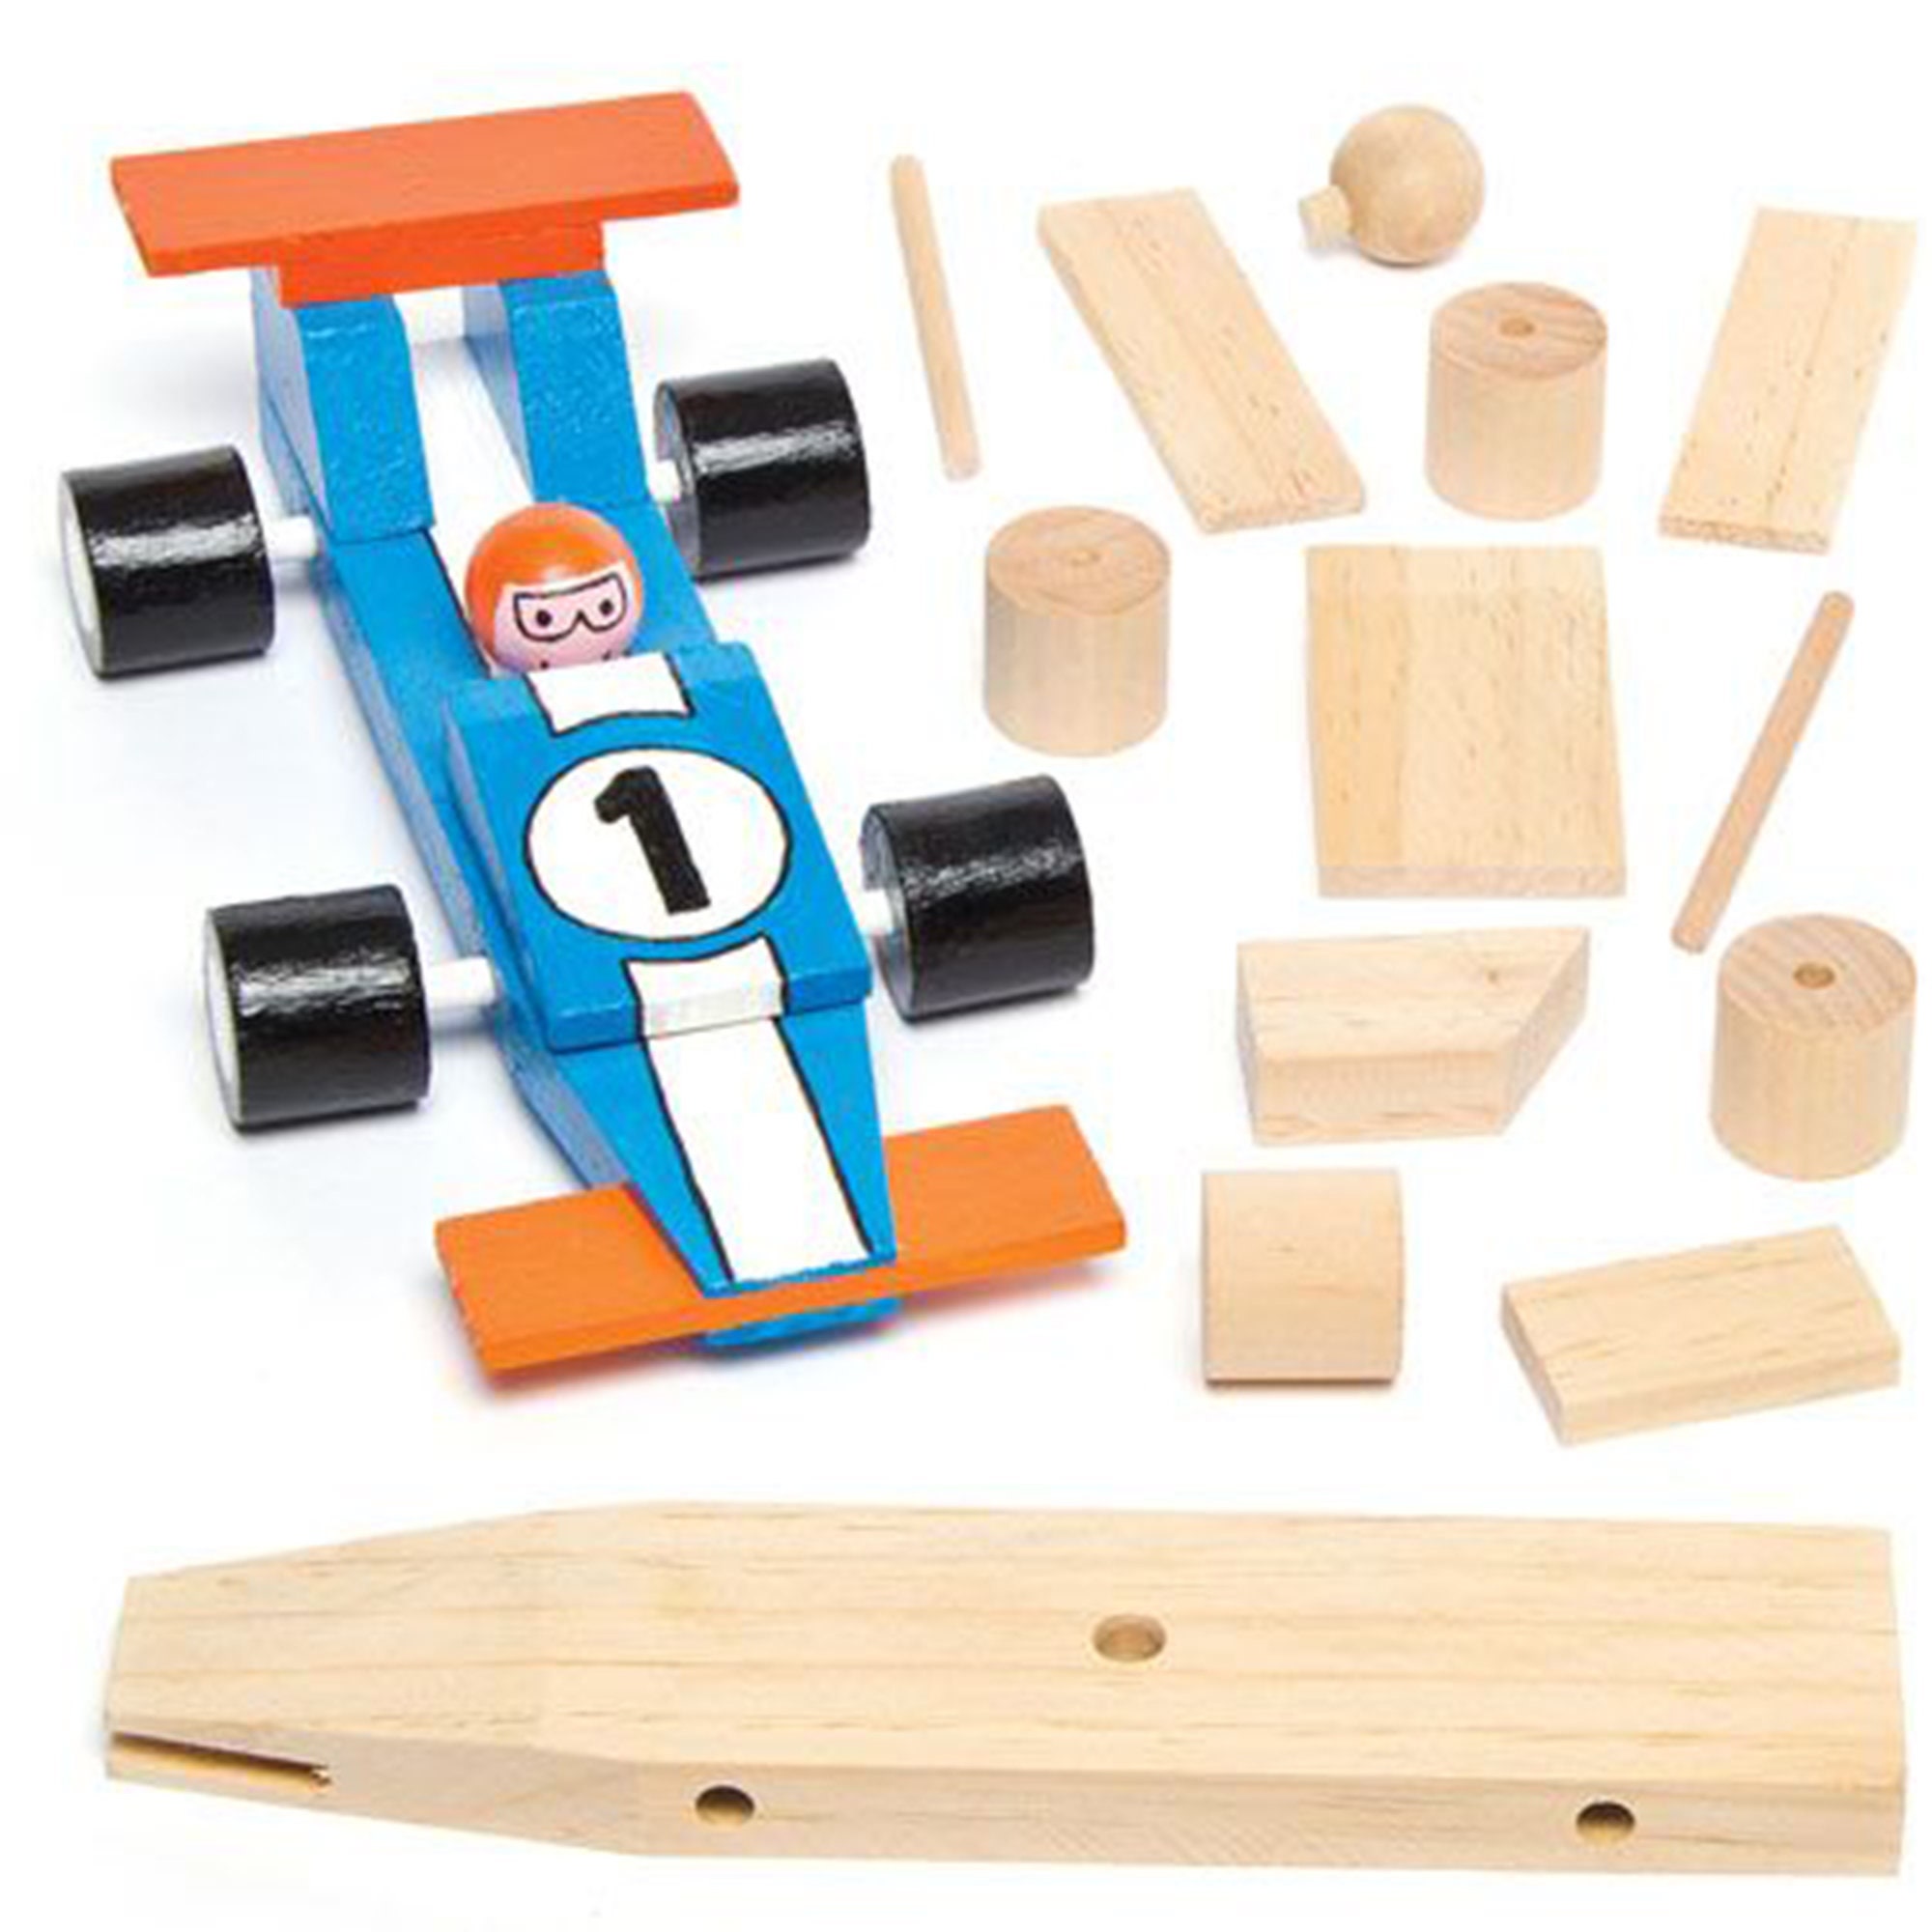 Wood and Paint Kit Race Car w/Easy Assemble Instructions to Build, Paint,  Race, Pinewoood Material